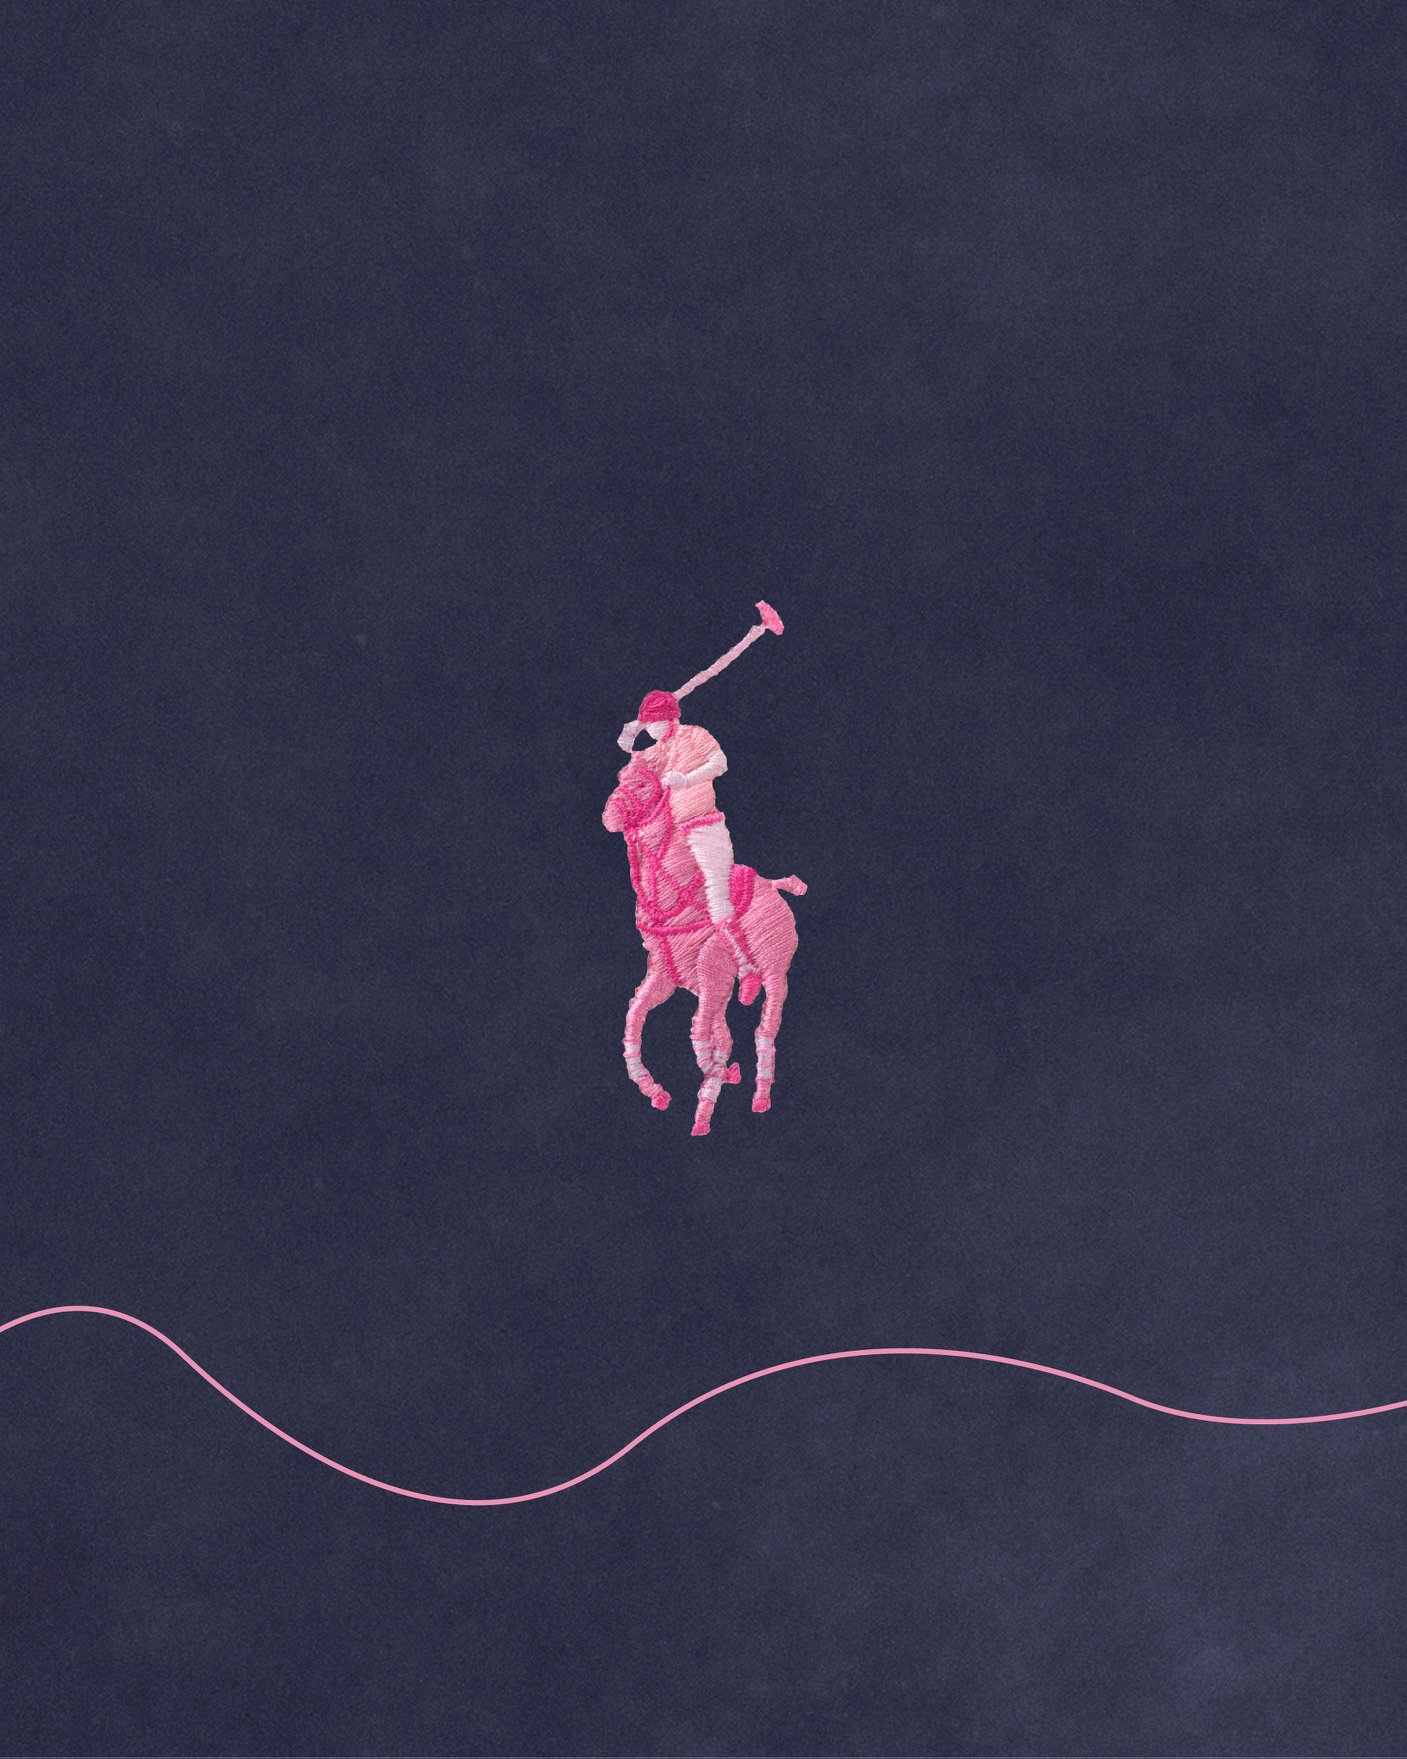 “Every October our iconic Polo Player turns pink in honor of the Pink Pony campaign and those who have been affected by cancer